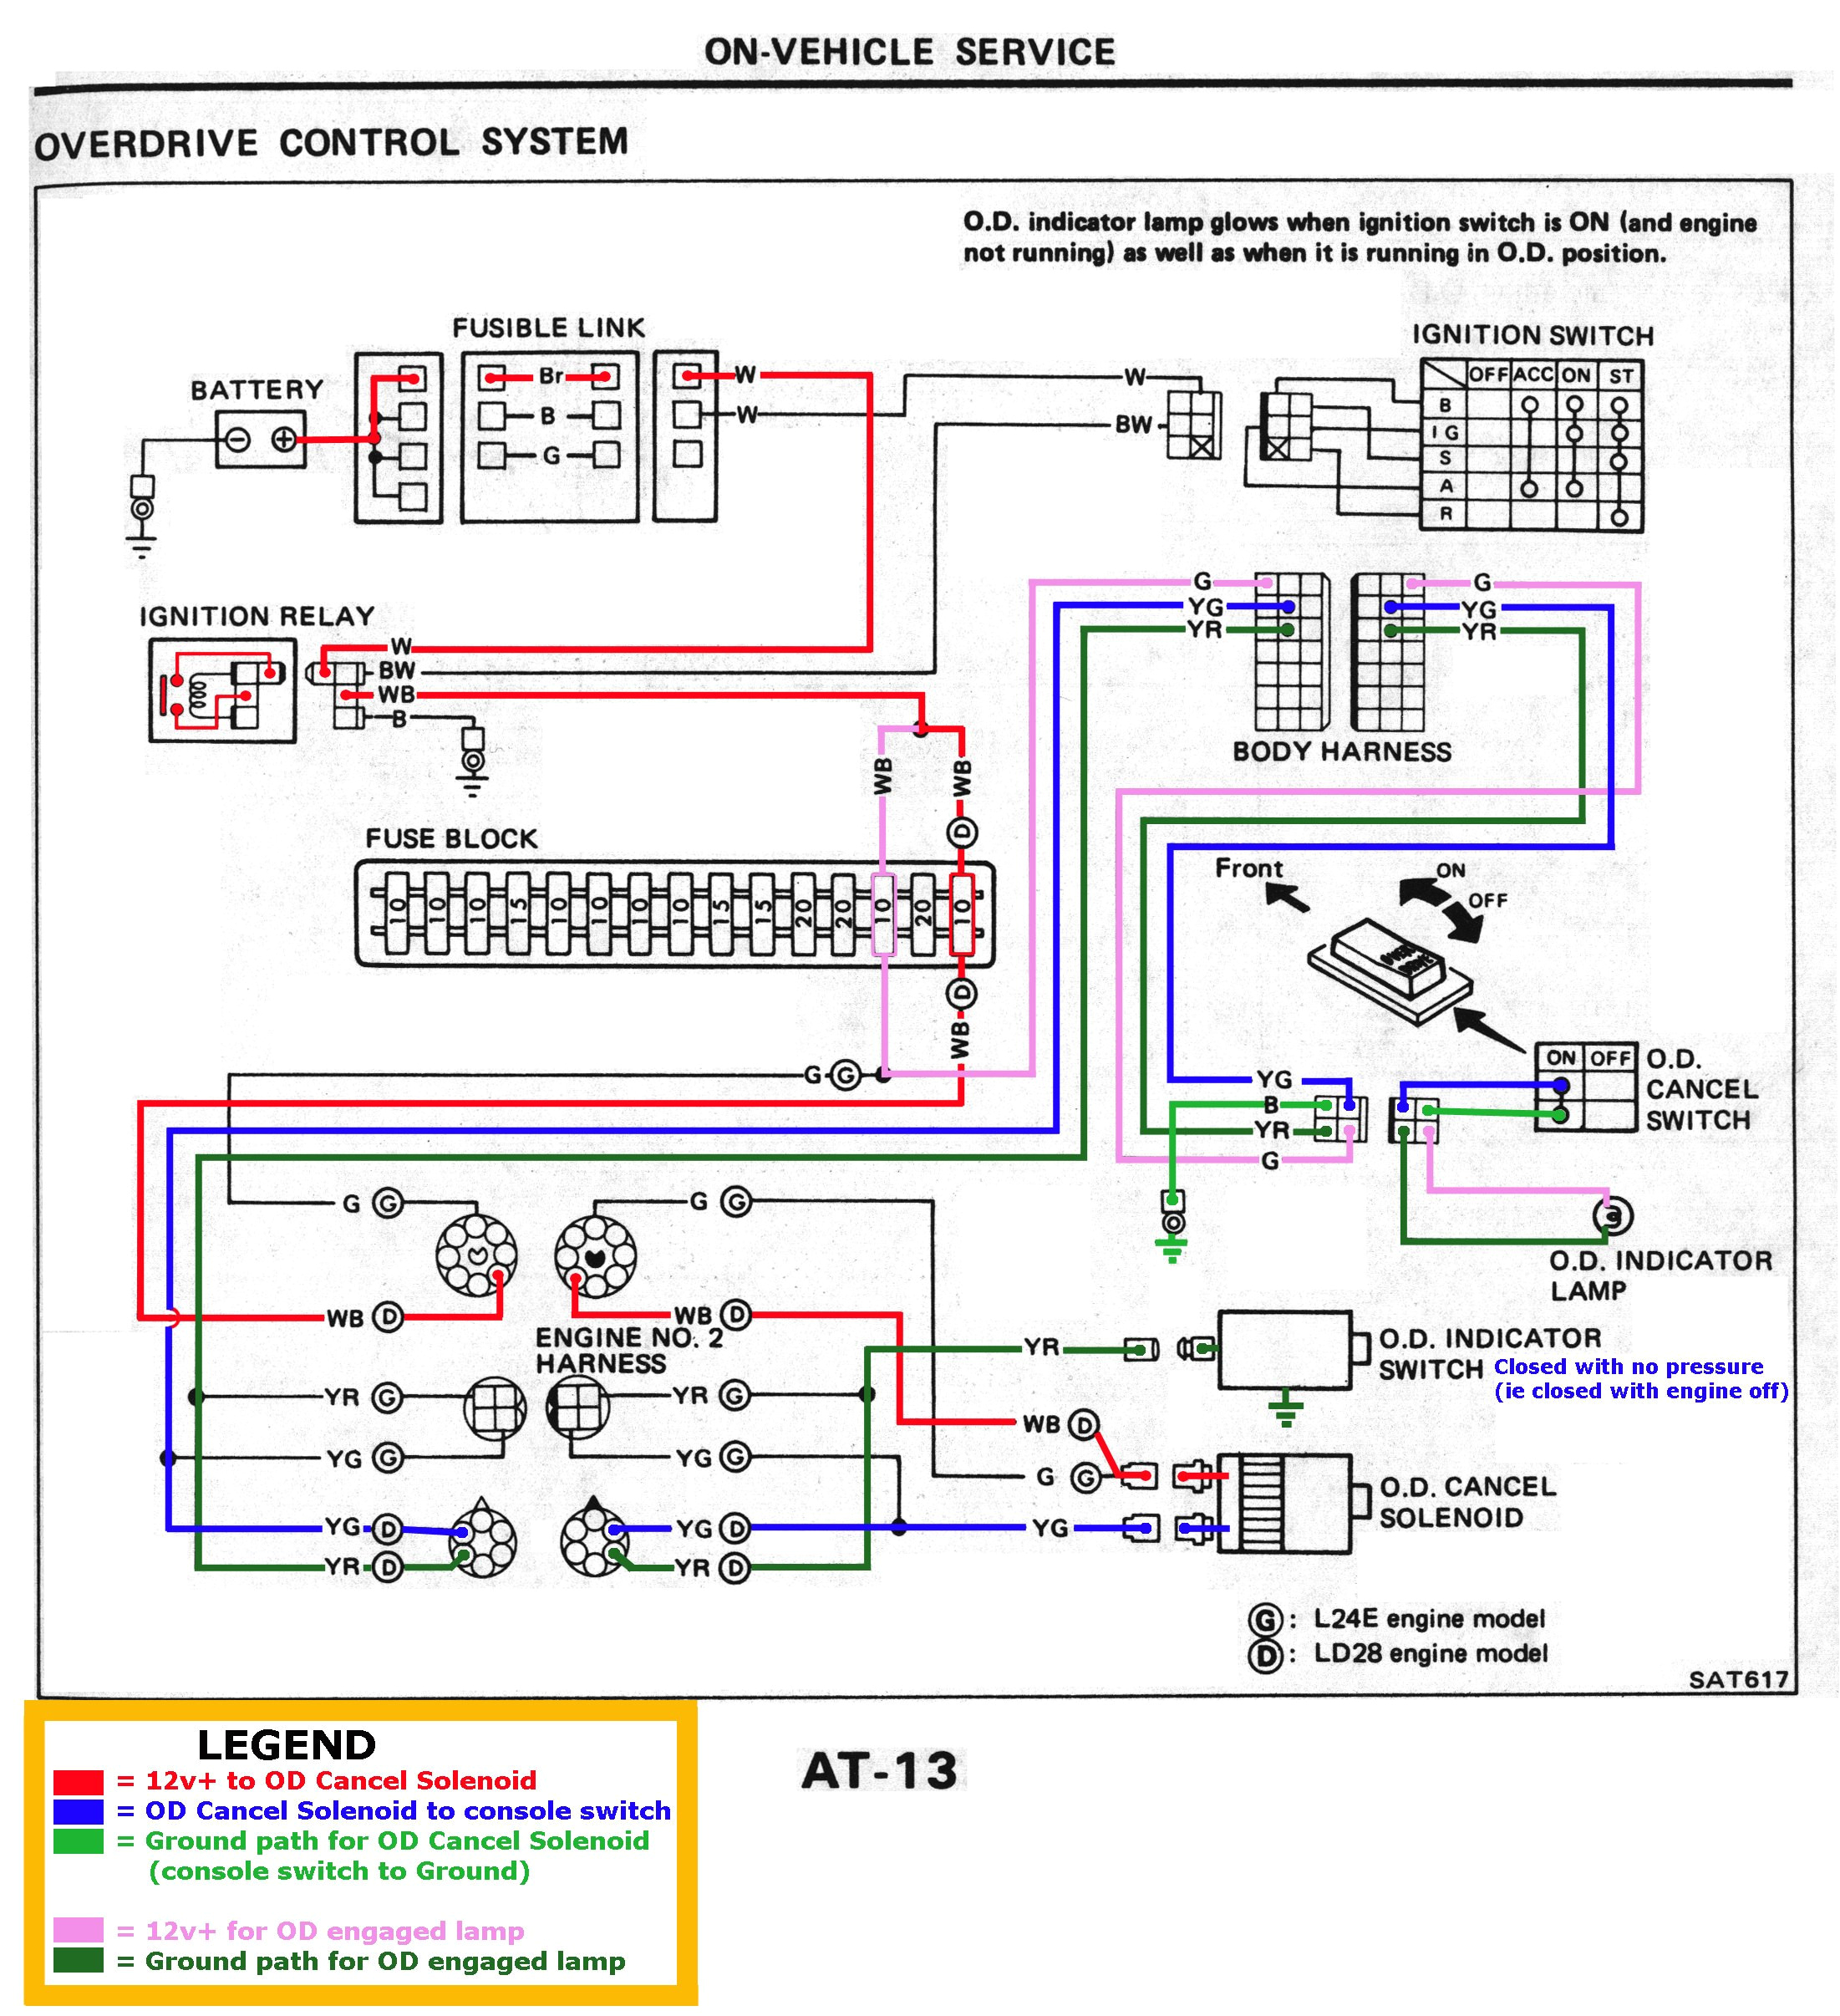 wiring diagram for mercury ignition switch free download wiring wiring diagram for 2007 mercury mountaineer wiring